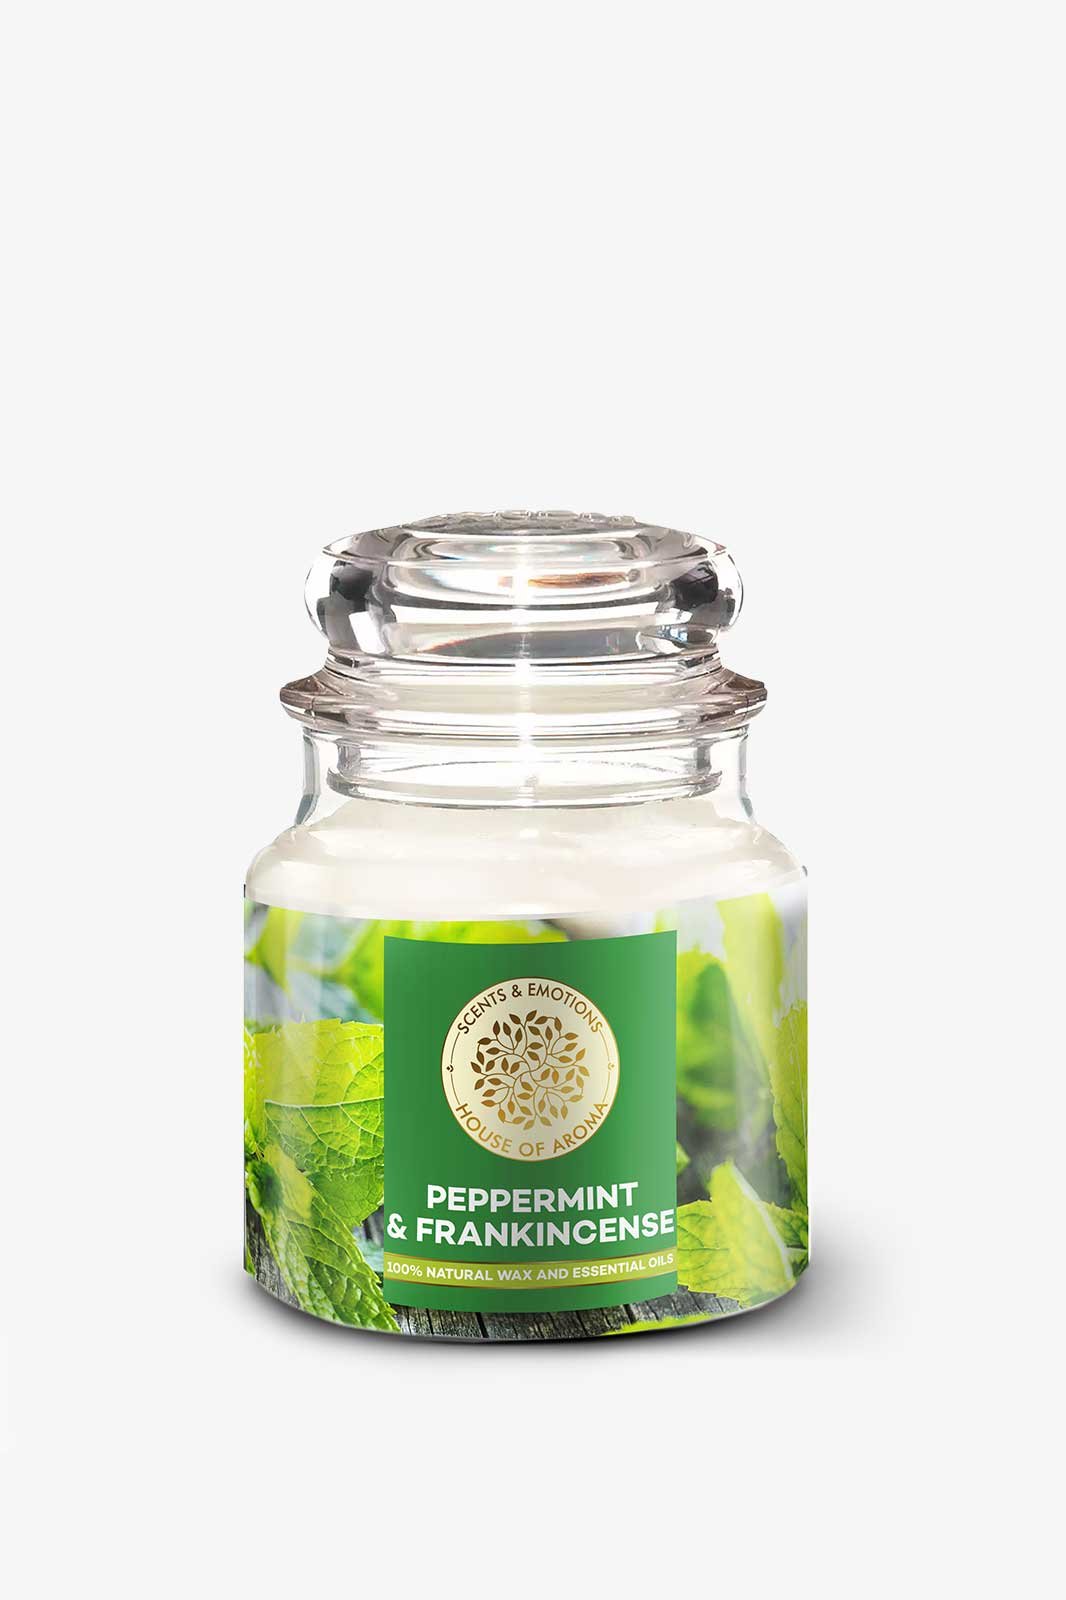 peppermint & frankincense natural scented candle, peppermint and frankincense blend, peppermint candle, peppermint candle wax, mint woodwick candle, peppermint outdoor candle, peppermint candles, peppermint candle fragrance, frankincense candle, frankincense essential oil candle, frankincense scented candle, frankincense aromatherapy candles, best frankincense candle, frankincense bowl candle, frankincense soy candle, frankincense tea candles, frankincense glass candle, frankincense incense candle, frankincense candle organic, sweet, frankincense candle, essential oil candles, essential oil for scented candles, essential oil beeswax candles, essential oil blends candles, essential oil candles non toxic, vegan essential oil candles, essential oil organic candles, pure essential oil candles, House of Aroma, home decor candle, room decor candles, scented candles decoration, best candles for home decor, scented candles for home decor, room decor with candles, decorating homemade candles, home decor scented candles, natural scented candles, natural scents for candles, organic scented candles India, luxury scented candles India, natural soy candle wax, natural fragrance for candles, natural soy candle company, best scented candles India, scented candles for bedroom, organic, scented candles India, most fragrant scented candles, glass jar candles, bell jar candles, bell jar candle, bell jar candle India, essential oil wax candle, soy wax essential oil candles, essential oil wax candles, natural scented candle brands, scented candles best brand, candle brands in India, organic scented candles India, best scented candle brands in India, top candle brands in India, best candle brands in the world, bedroom candles, room fragrance candles, best bedroom candles, best room scented candles, room freshener candles, beeswax candles, beeswax candles scented, beeswax candles jar